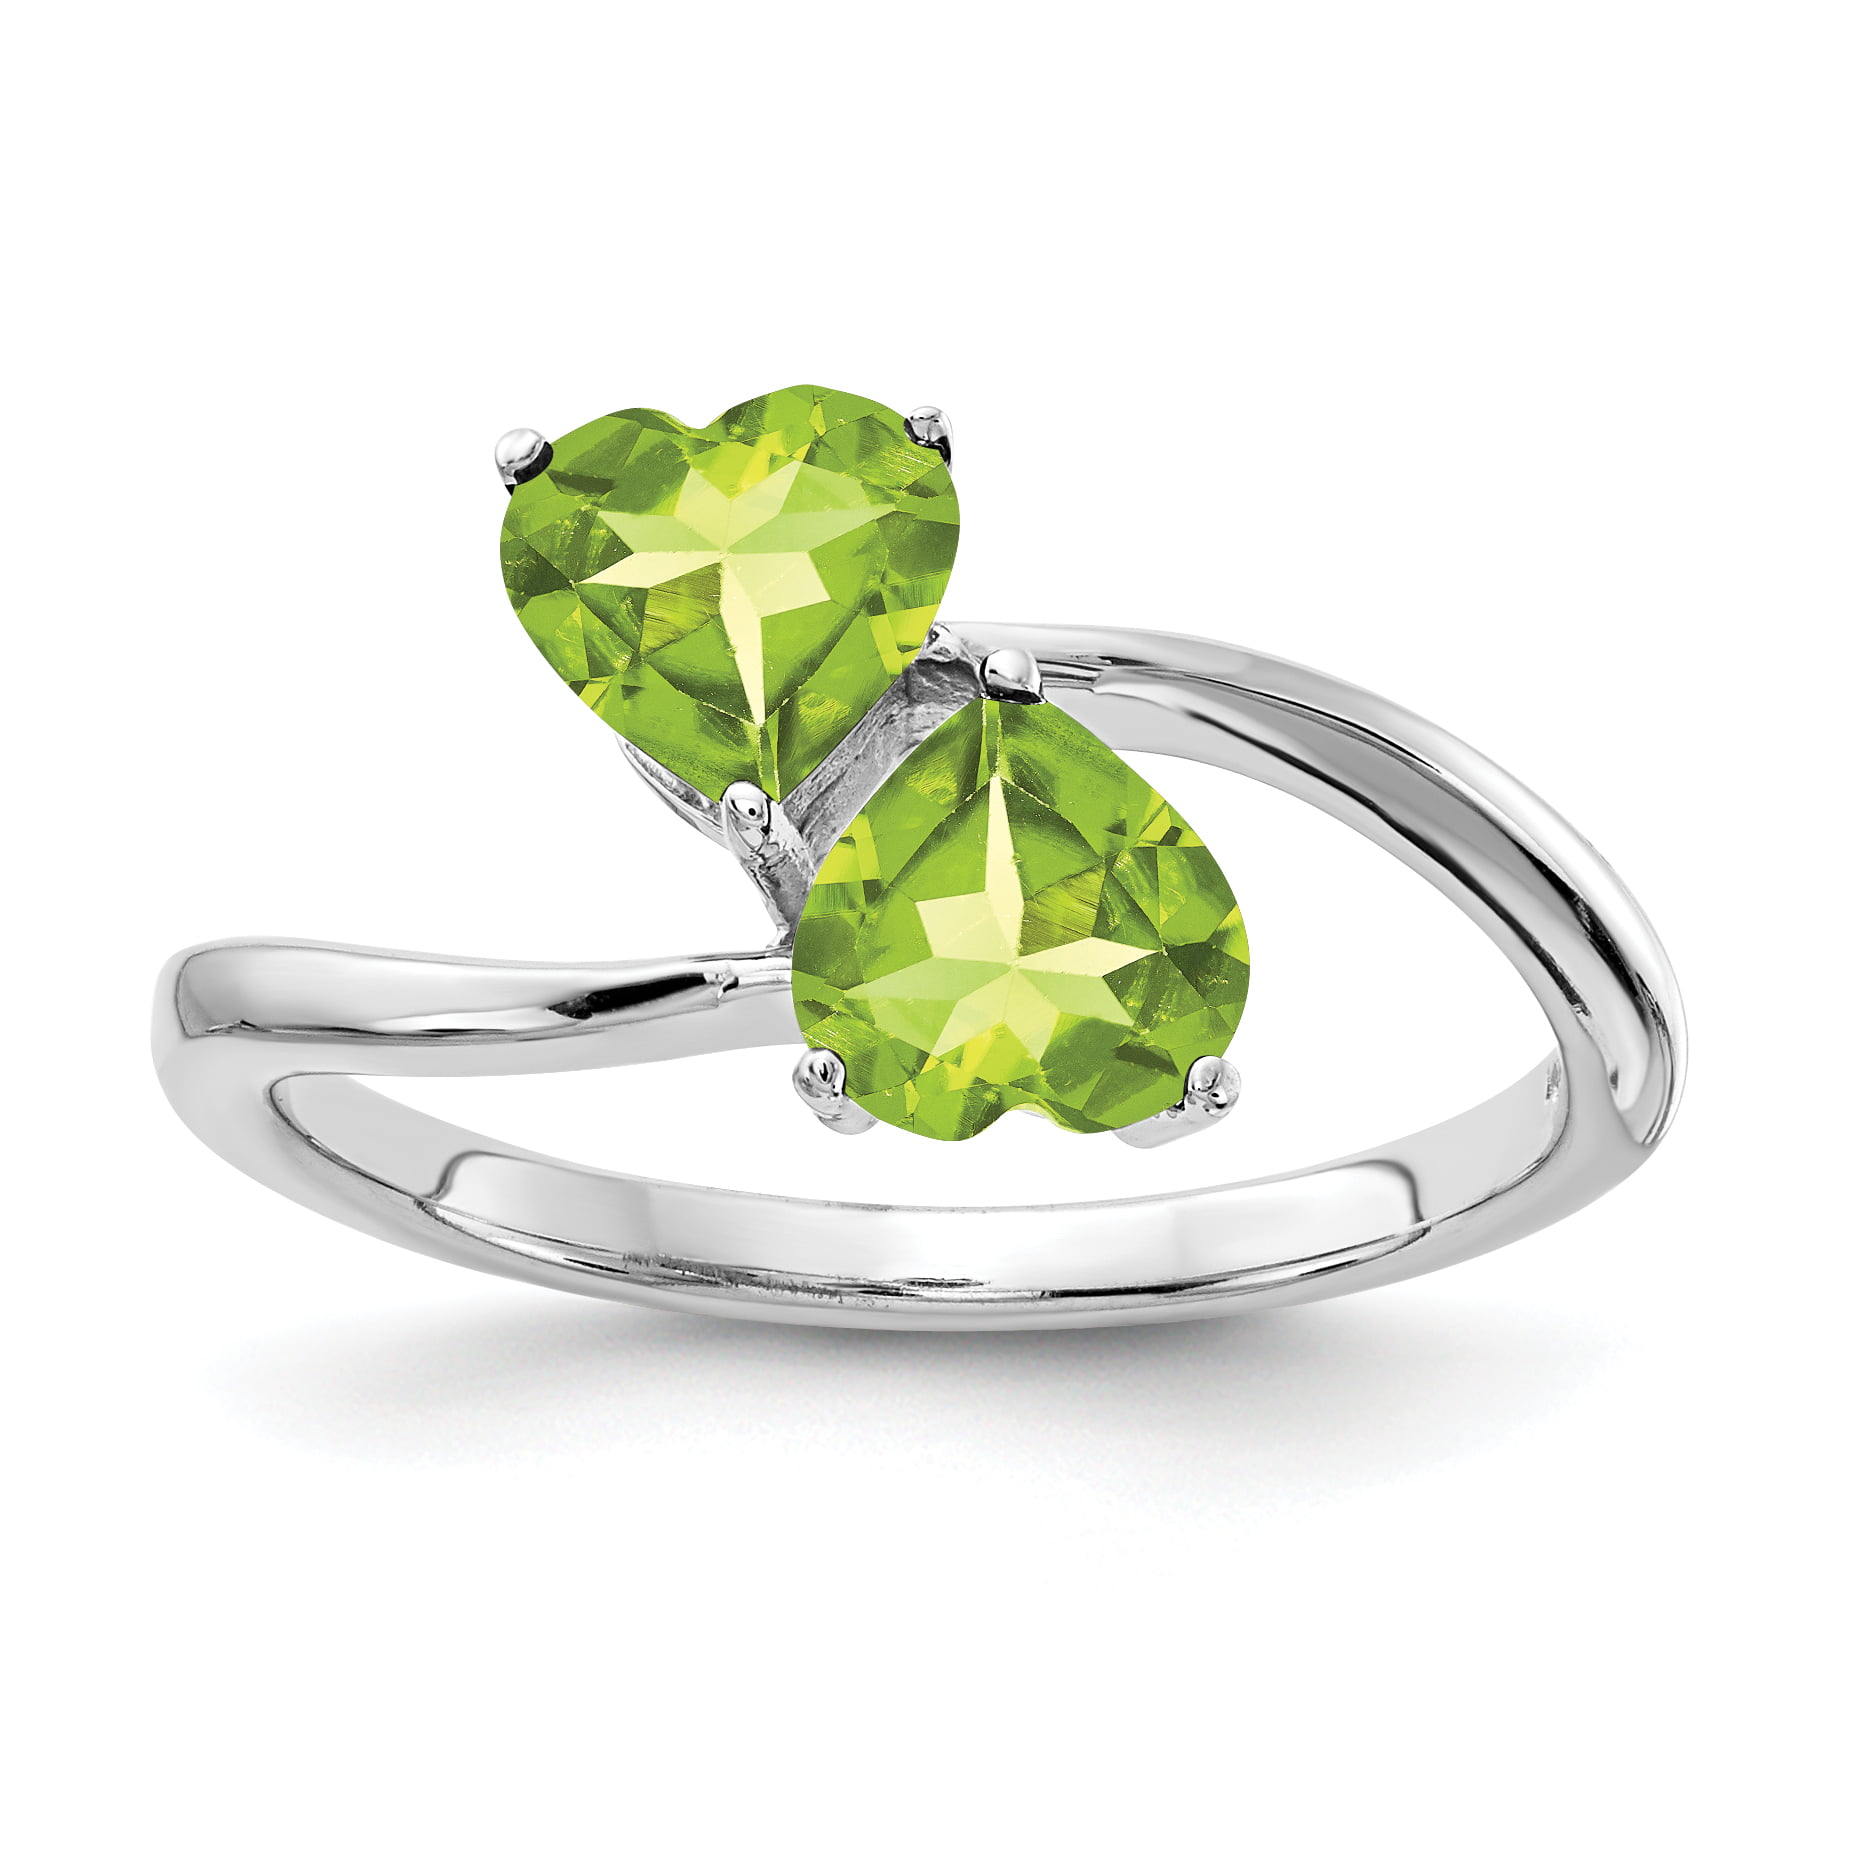 Solid 14k White Gold Heart Simulated Peridot Simulated Birthstone Ring 5mm